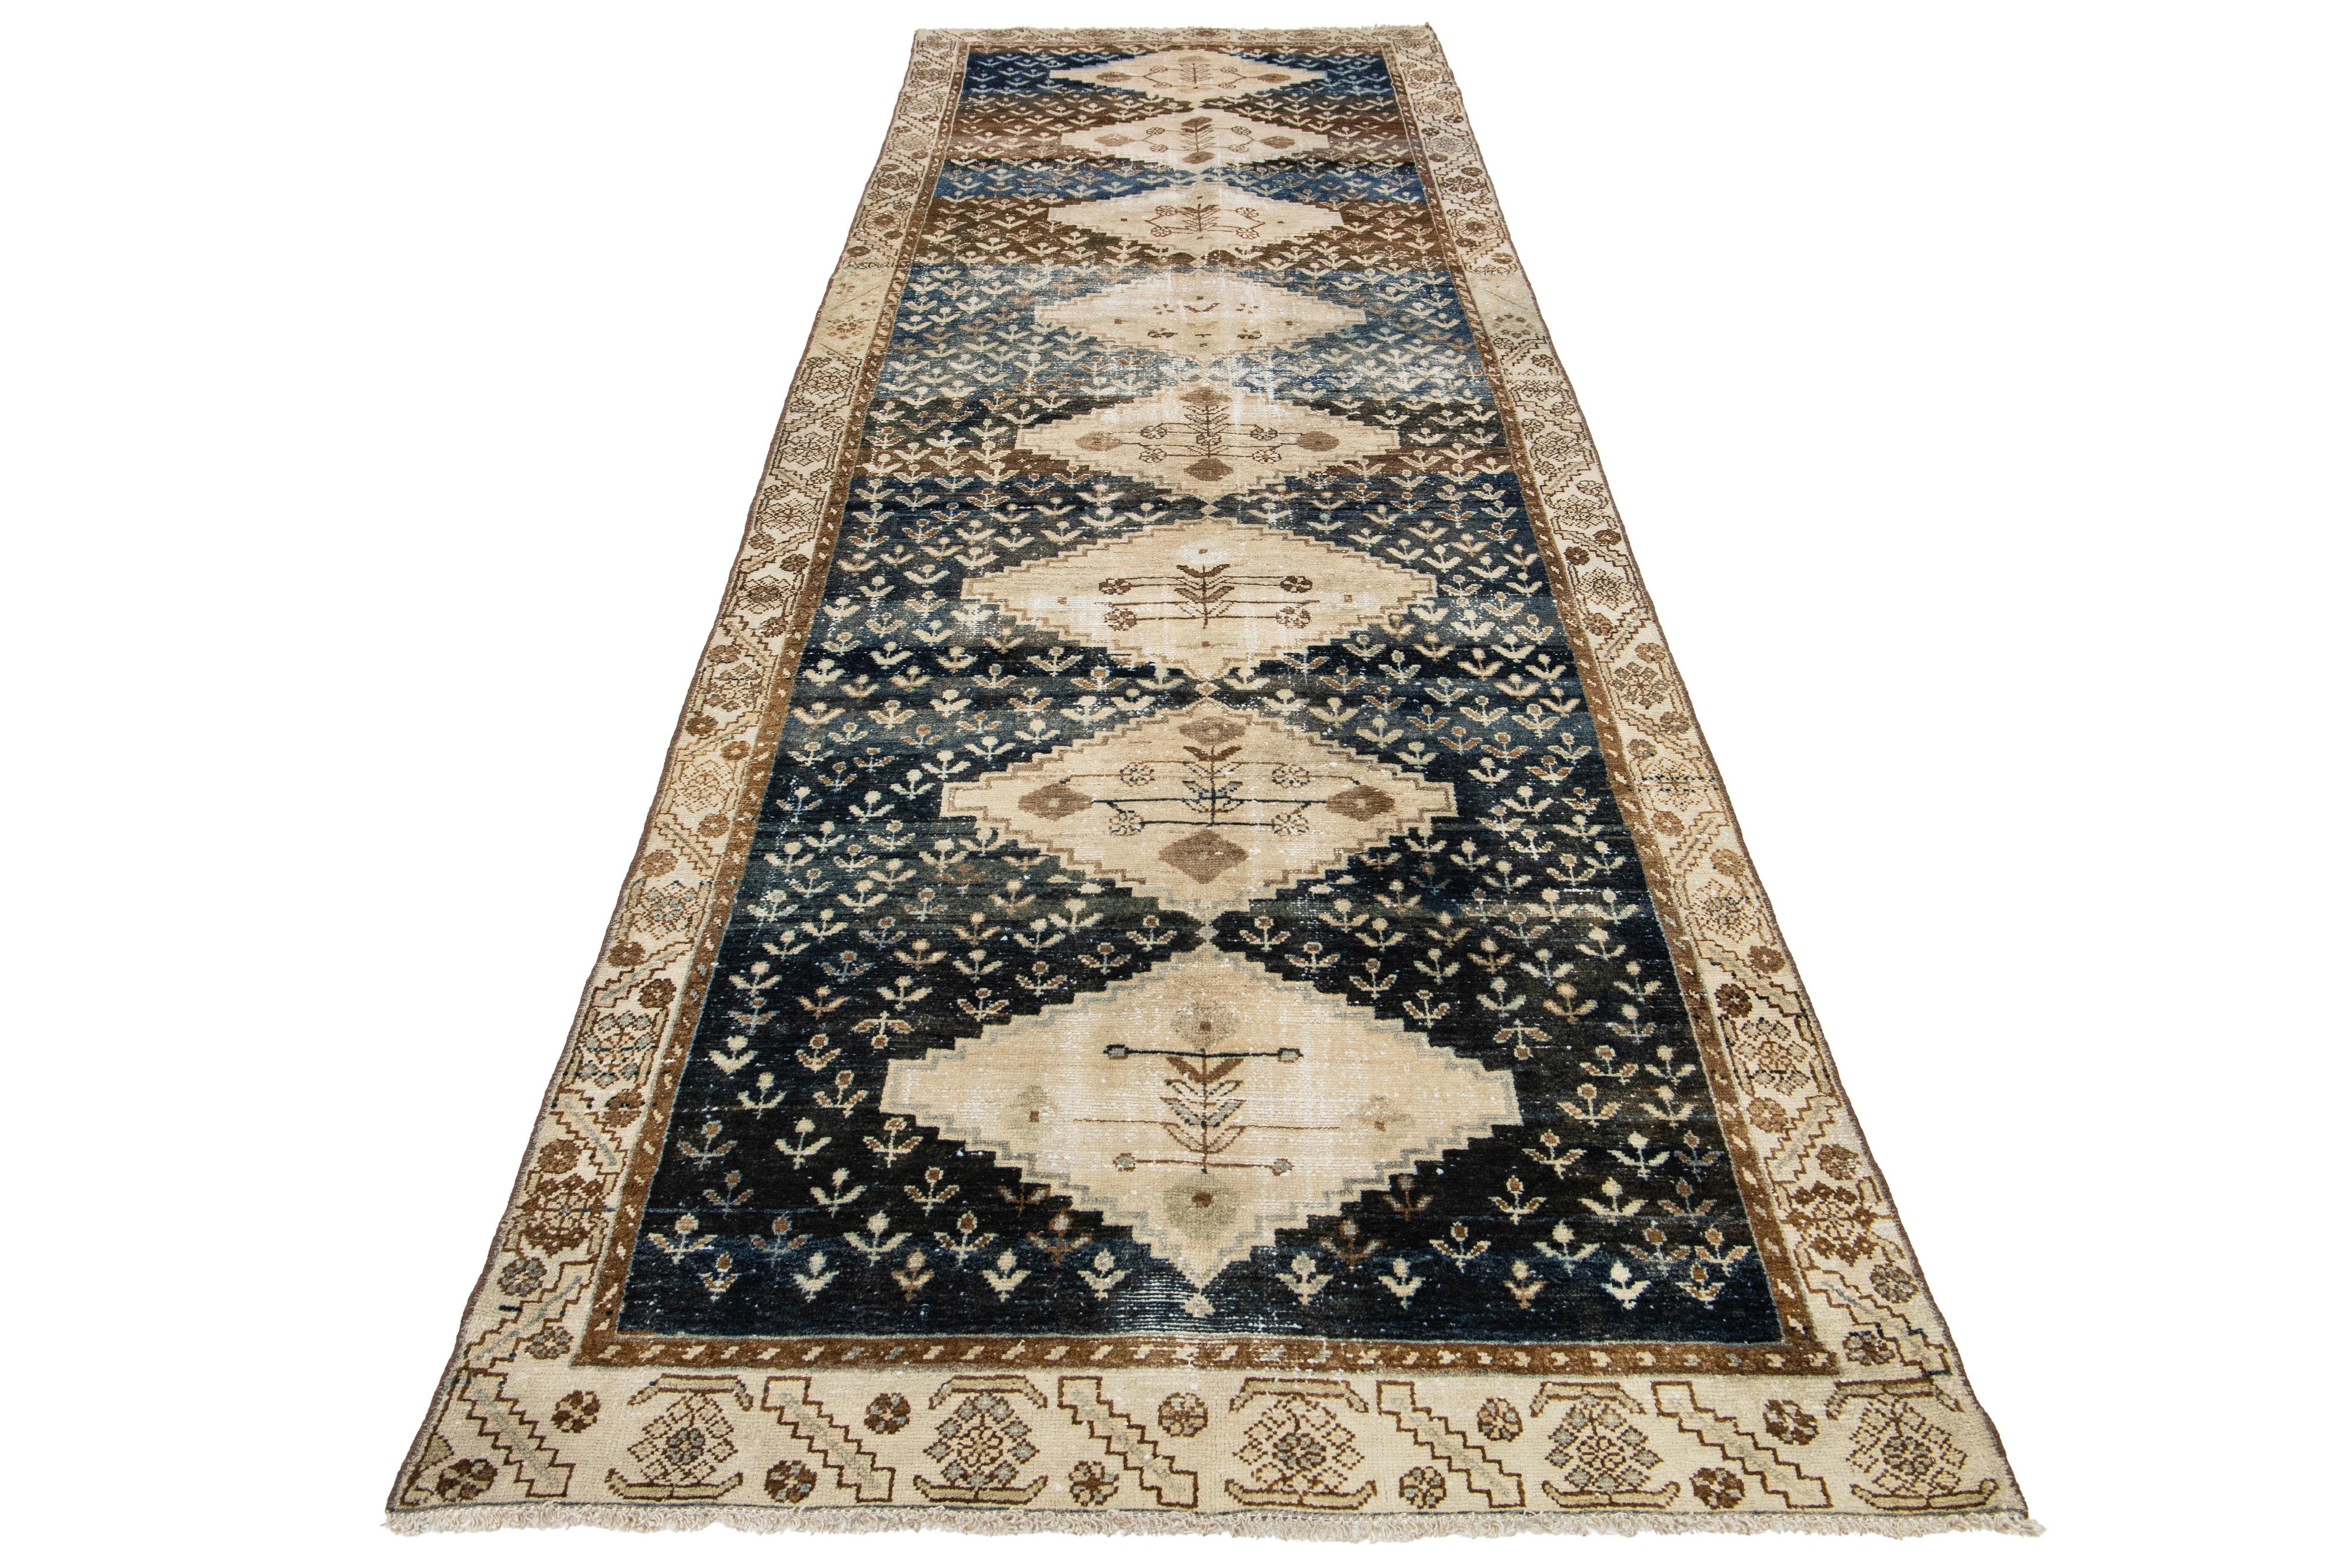 This antique Persian Malayer rug features hand-knotted wool in a navy blue and brown color field. Its allover pattern is adorned with beige accents, giving it a charming look.

This rug measures 4'4